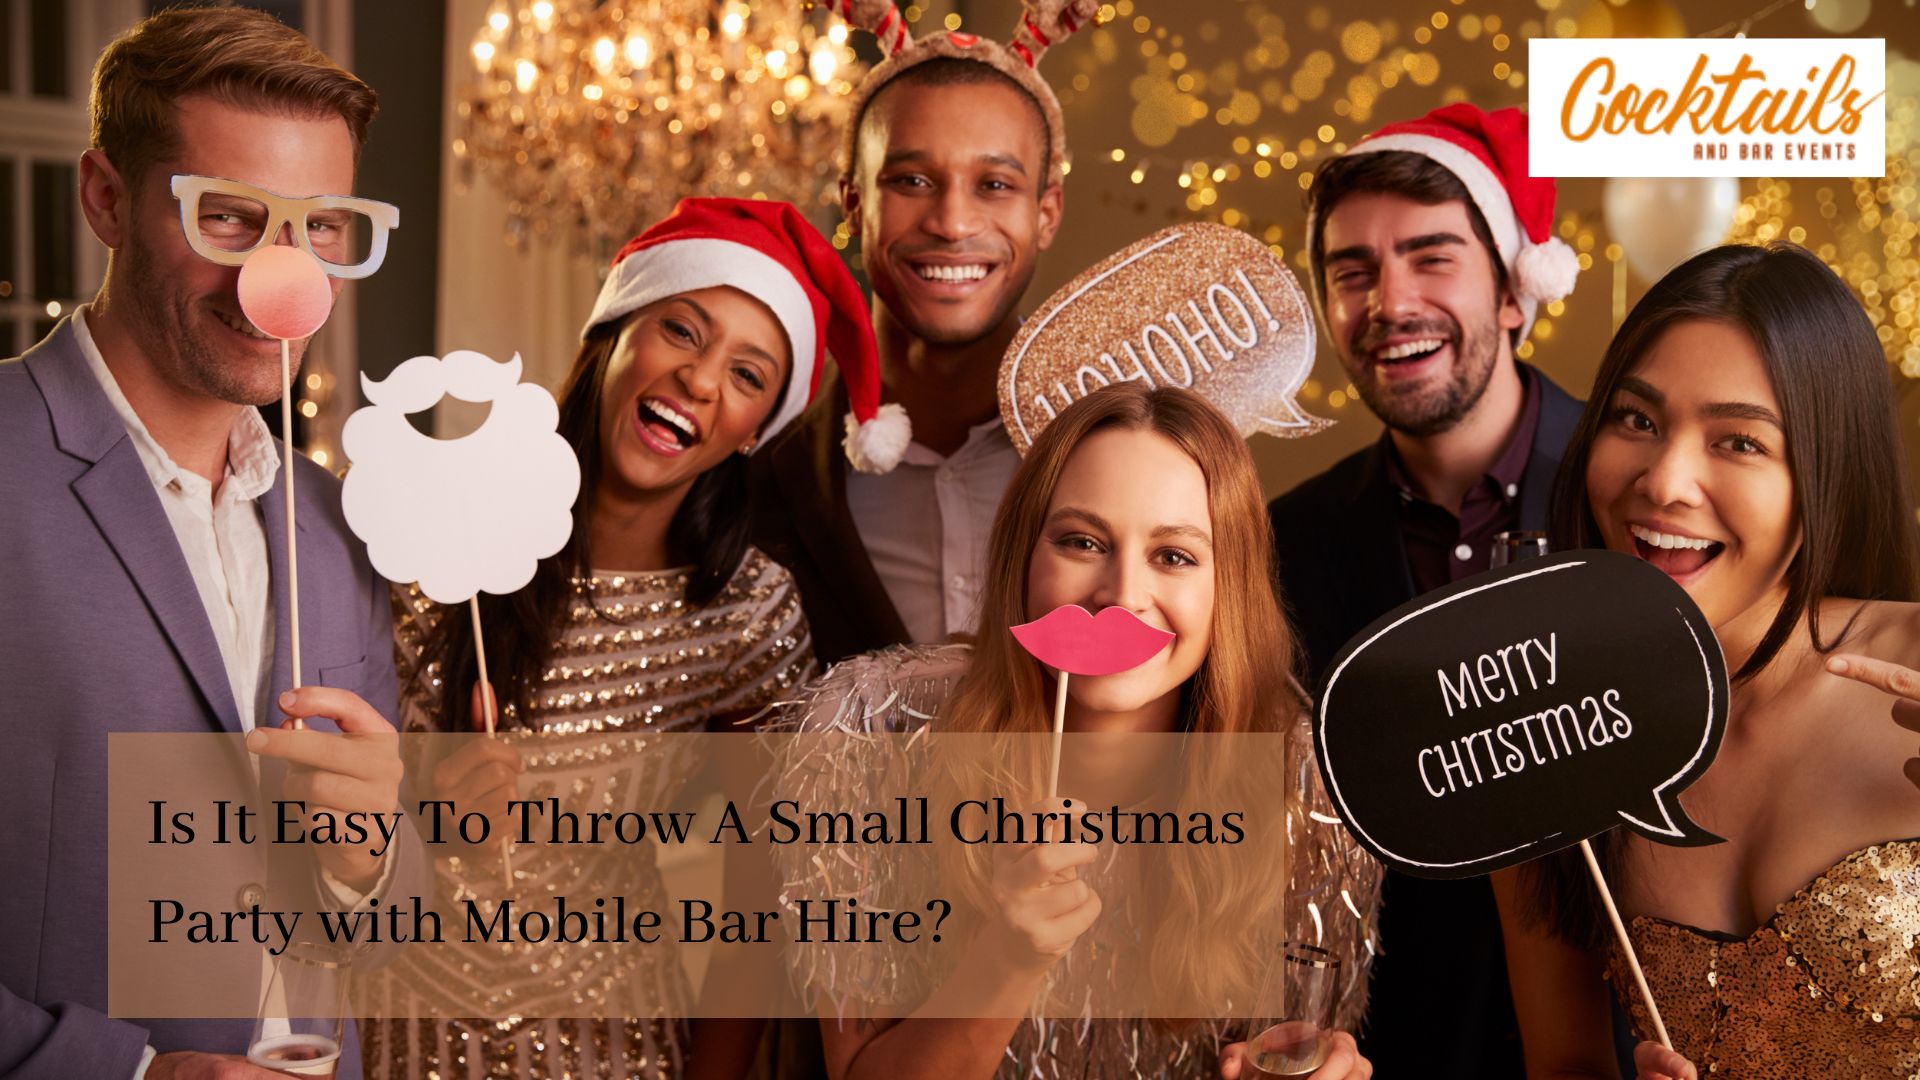 Is It Easy To Throw A Small Christmas Party with Mobile Bar Hire? -